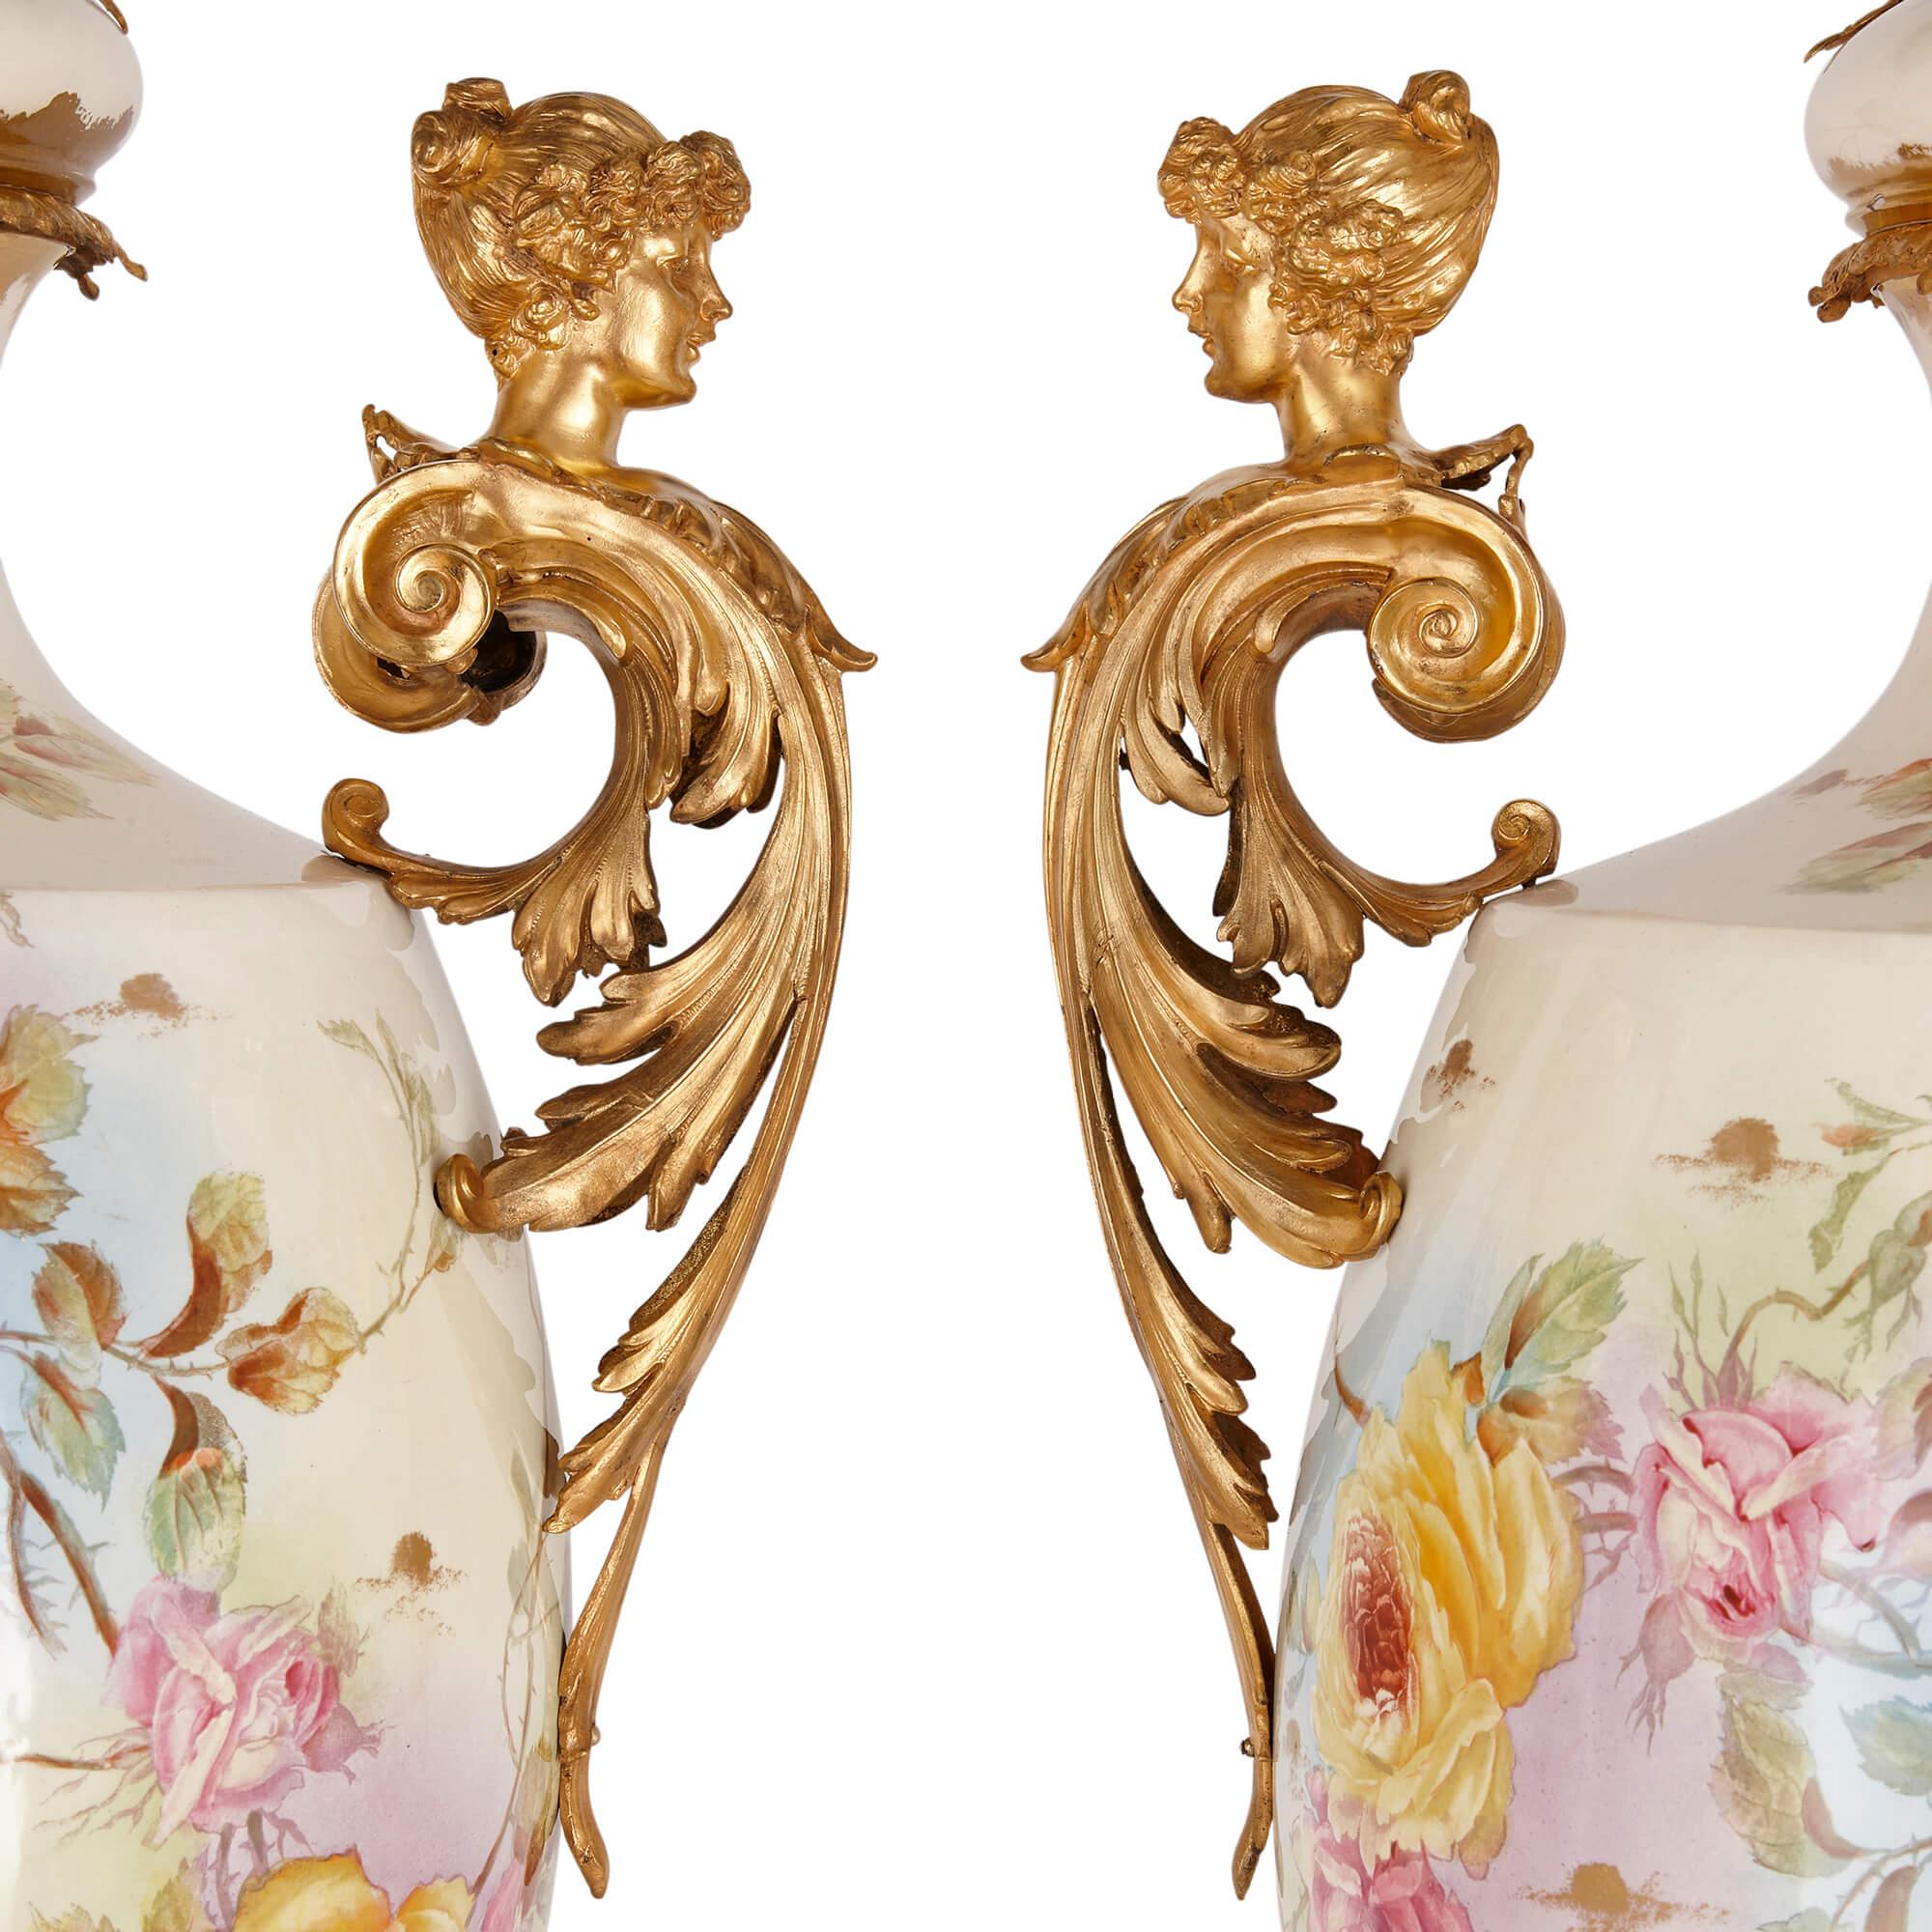 French Pair of Large Sèvres-style Porcelain and Gilt-Metal Vases For Sale